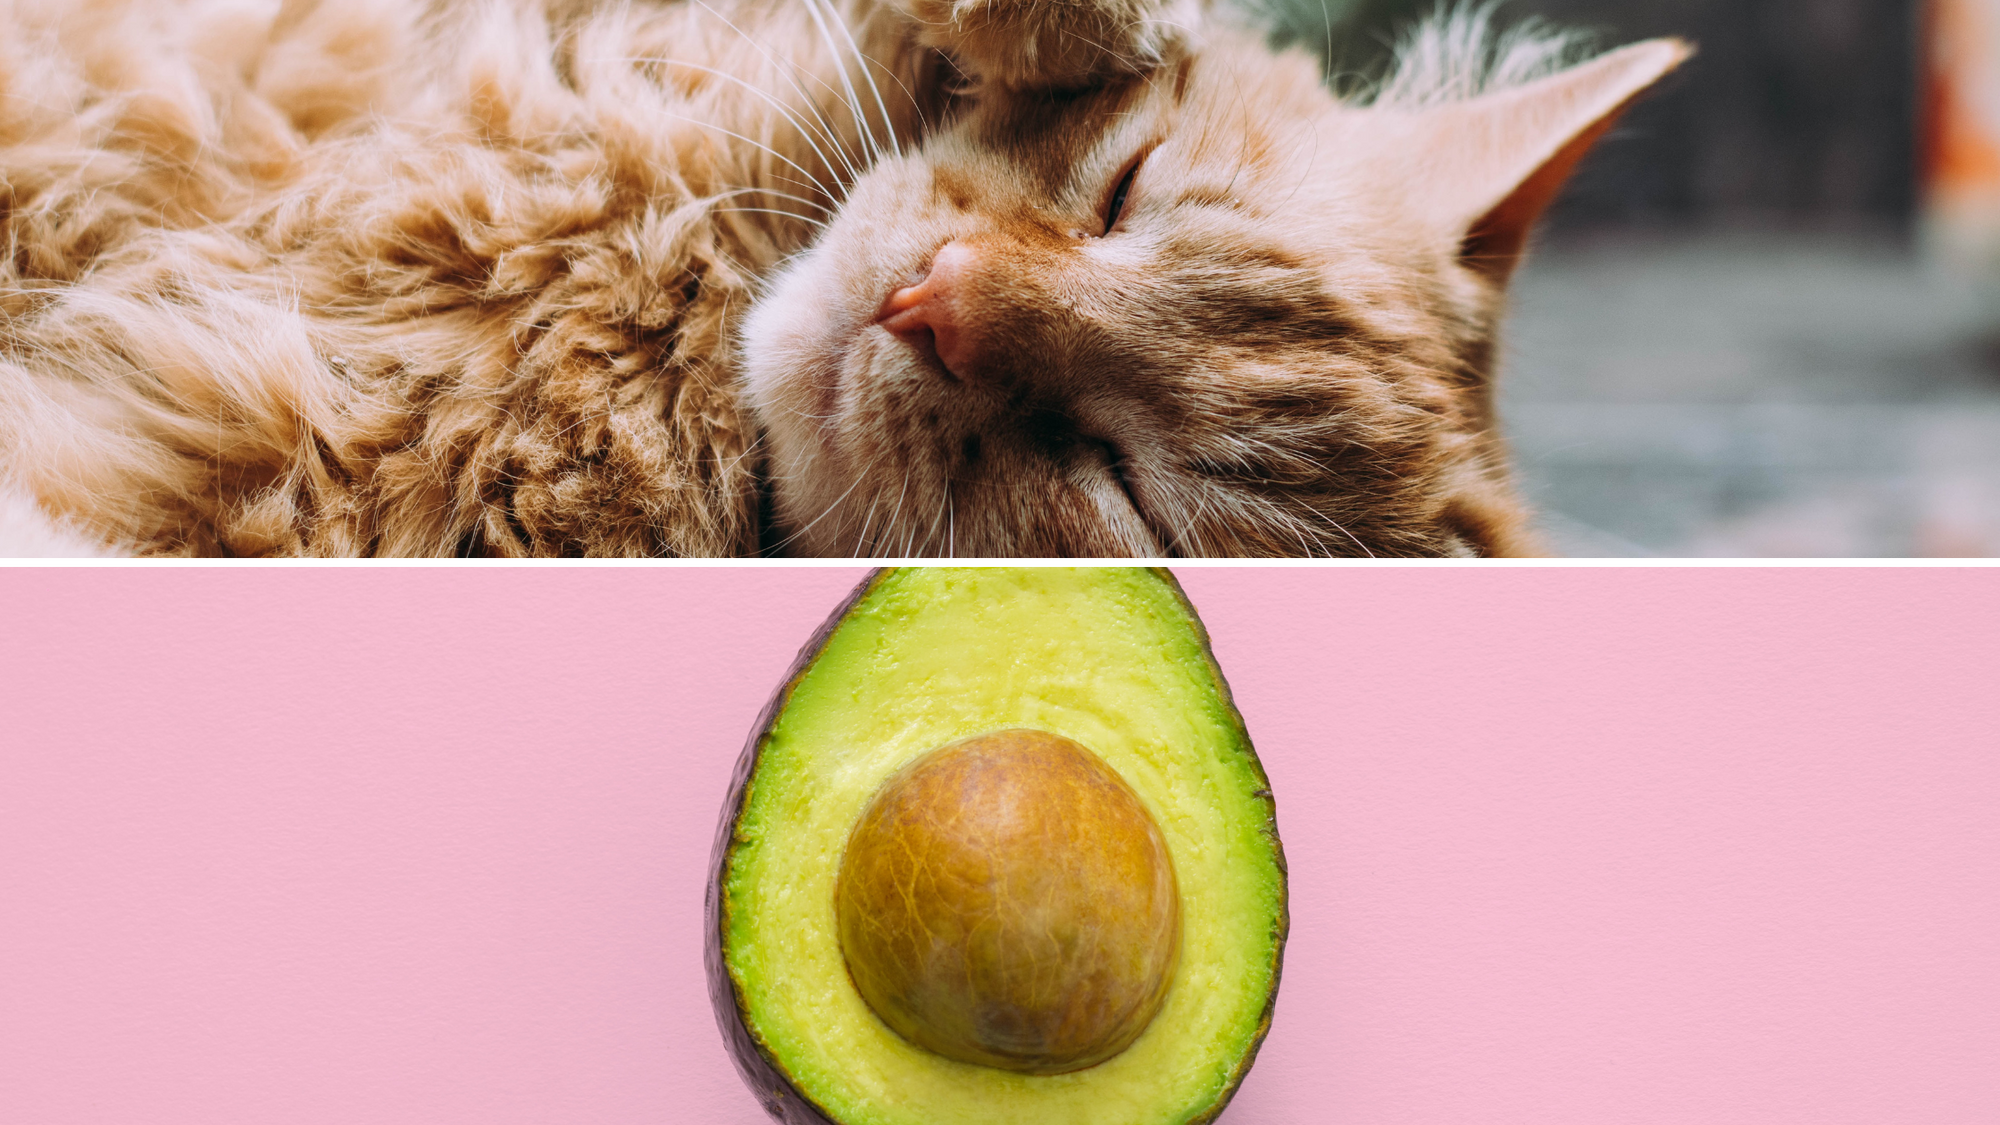 Foods that are toxic for cats